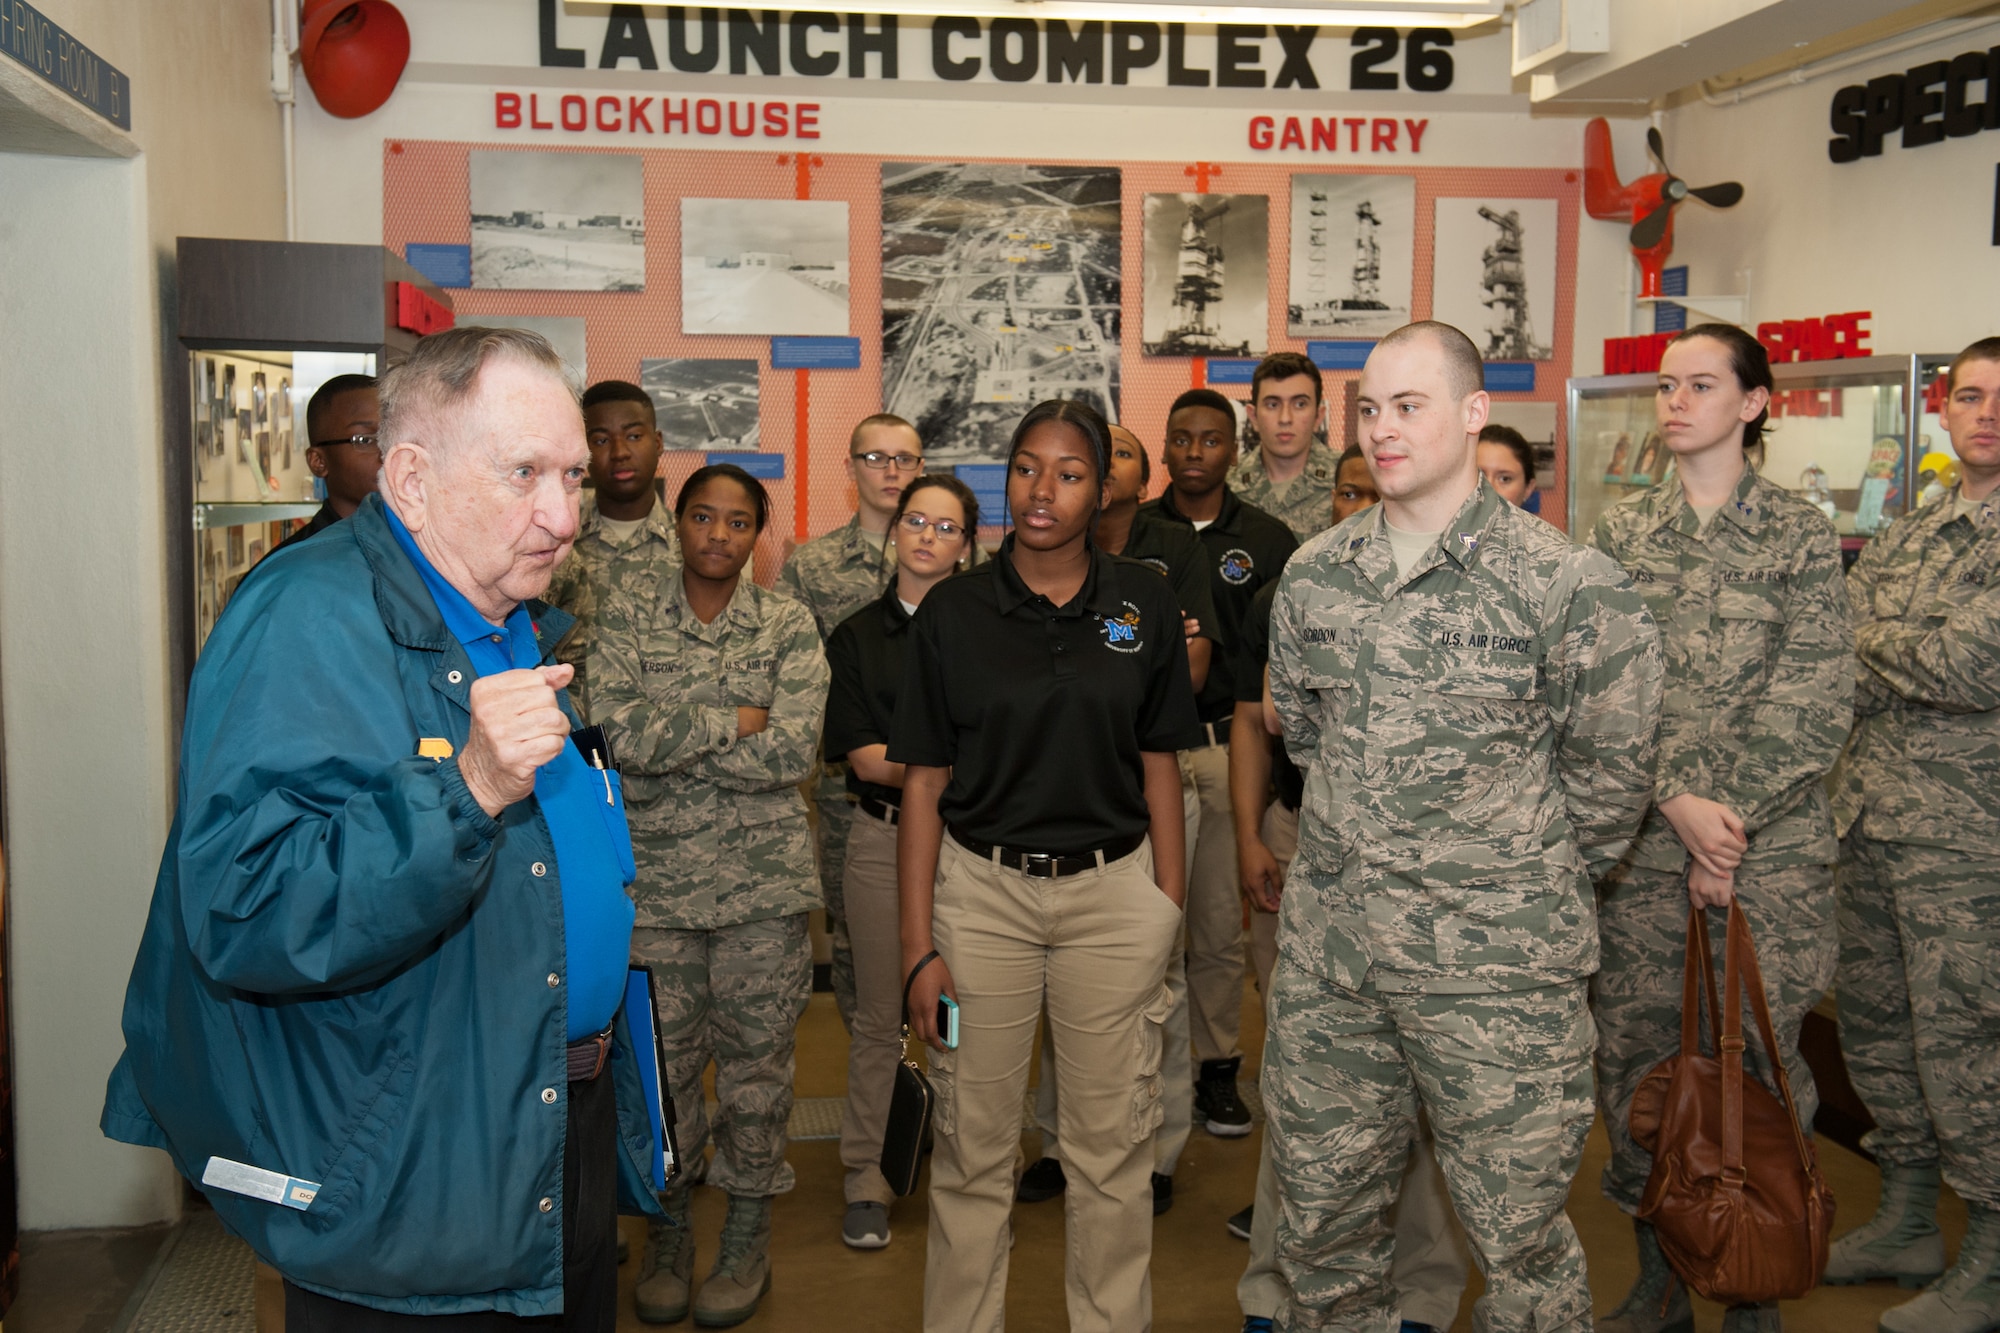 Members of the University of Memphis Air Force ROTC Detachment 785 visited Patrick Air Force Base and Cape Canaveral Air Force Station, Fla., and received a firsthand look at the 45th Space Wing’s mission and day-to-day operations, March 7, 2016. The cadets’ visit exposed them to a real-world Air Force environment and provided them the opportunity to see how base components work together to meet the mission. (U.S. Air Force photo/Benjamin Thacker) (Released)  